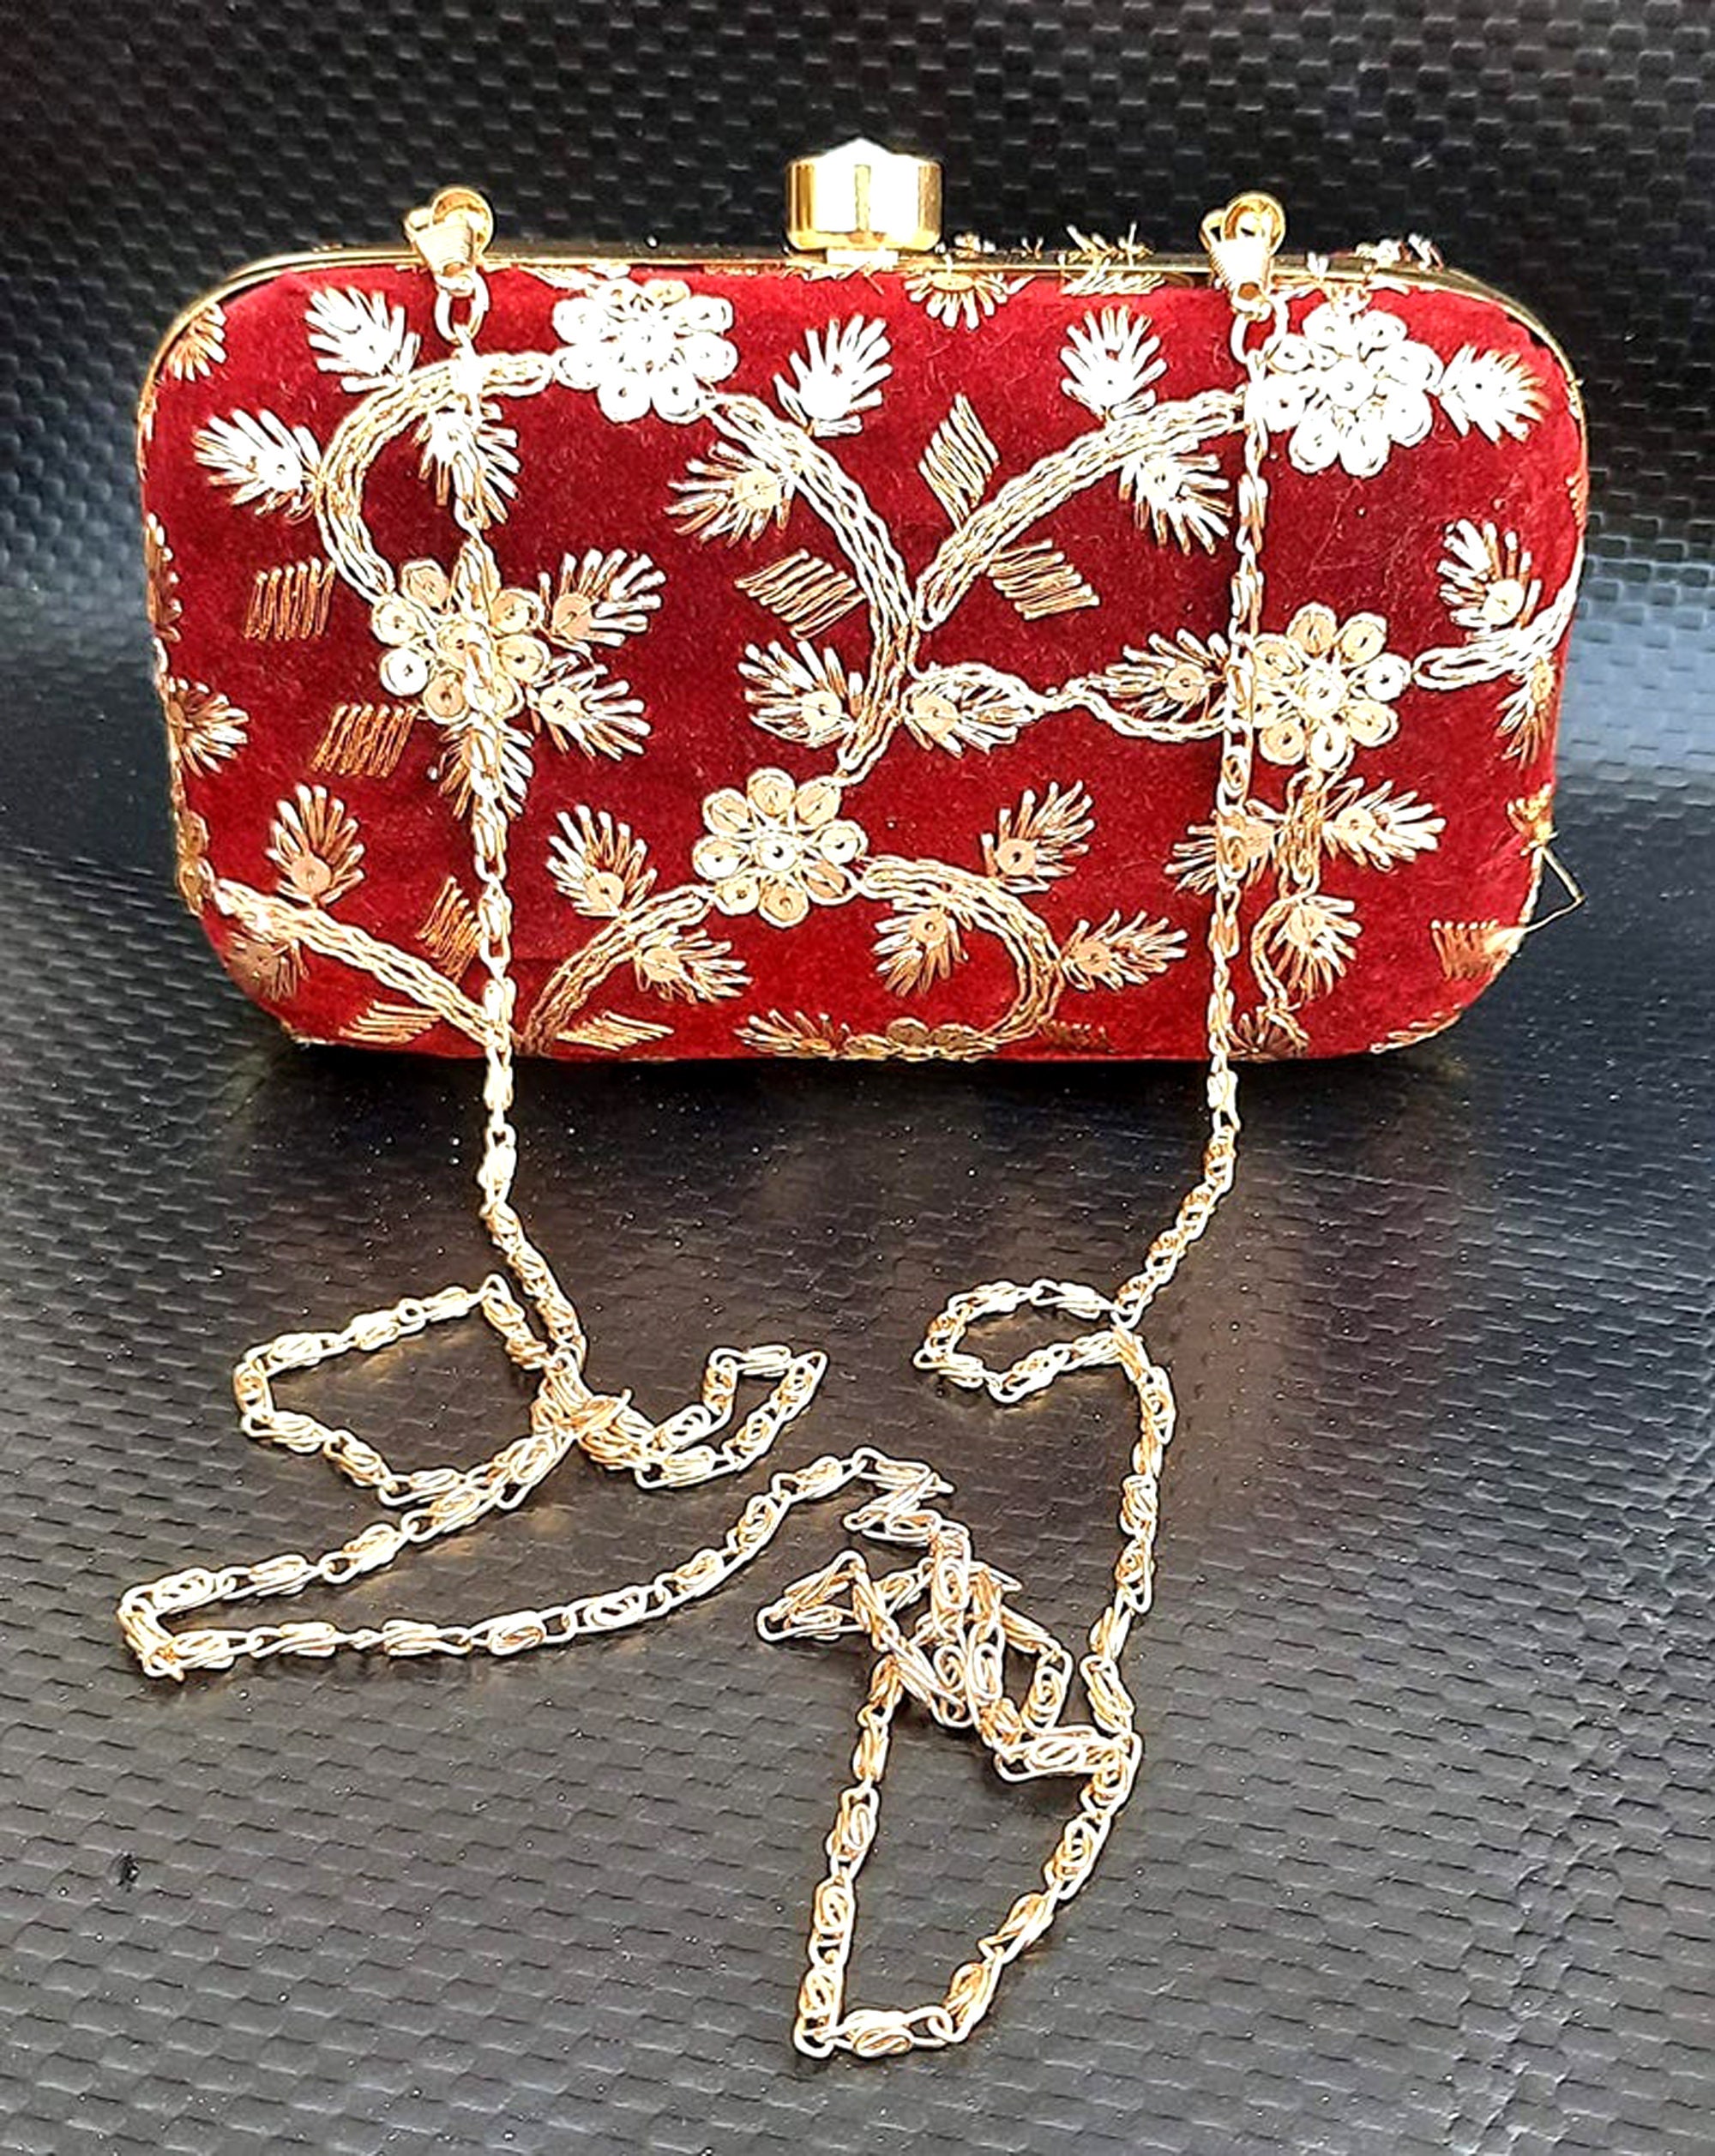 100 Pieces Clutch Bag women wedding gifted bag Indian | Etsy